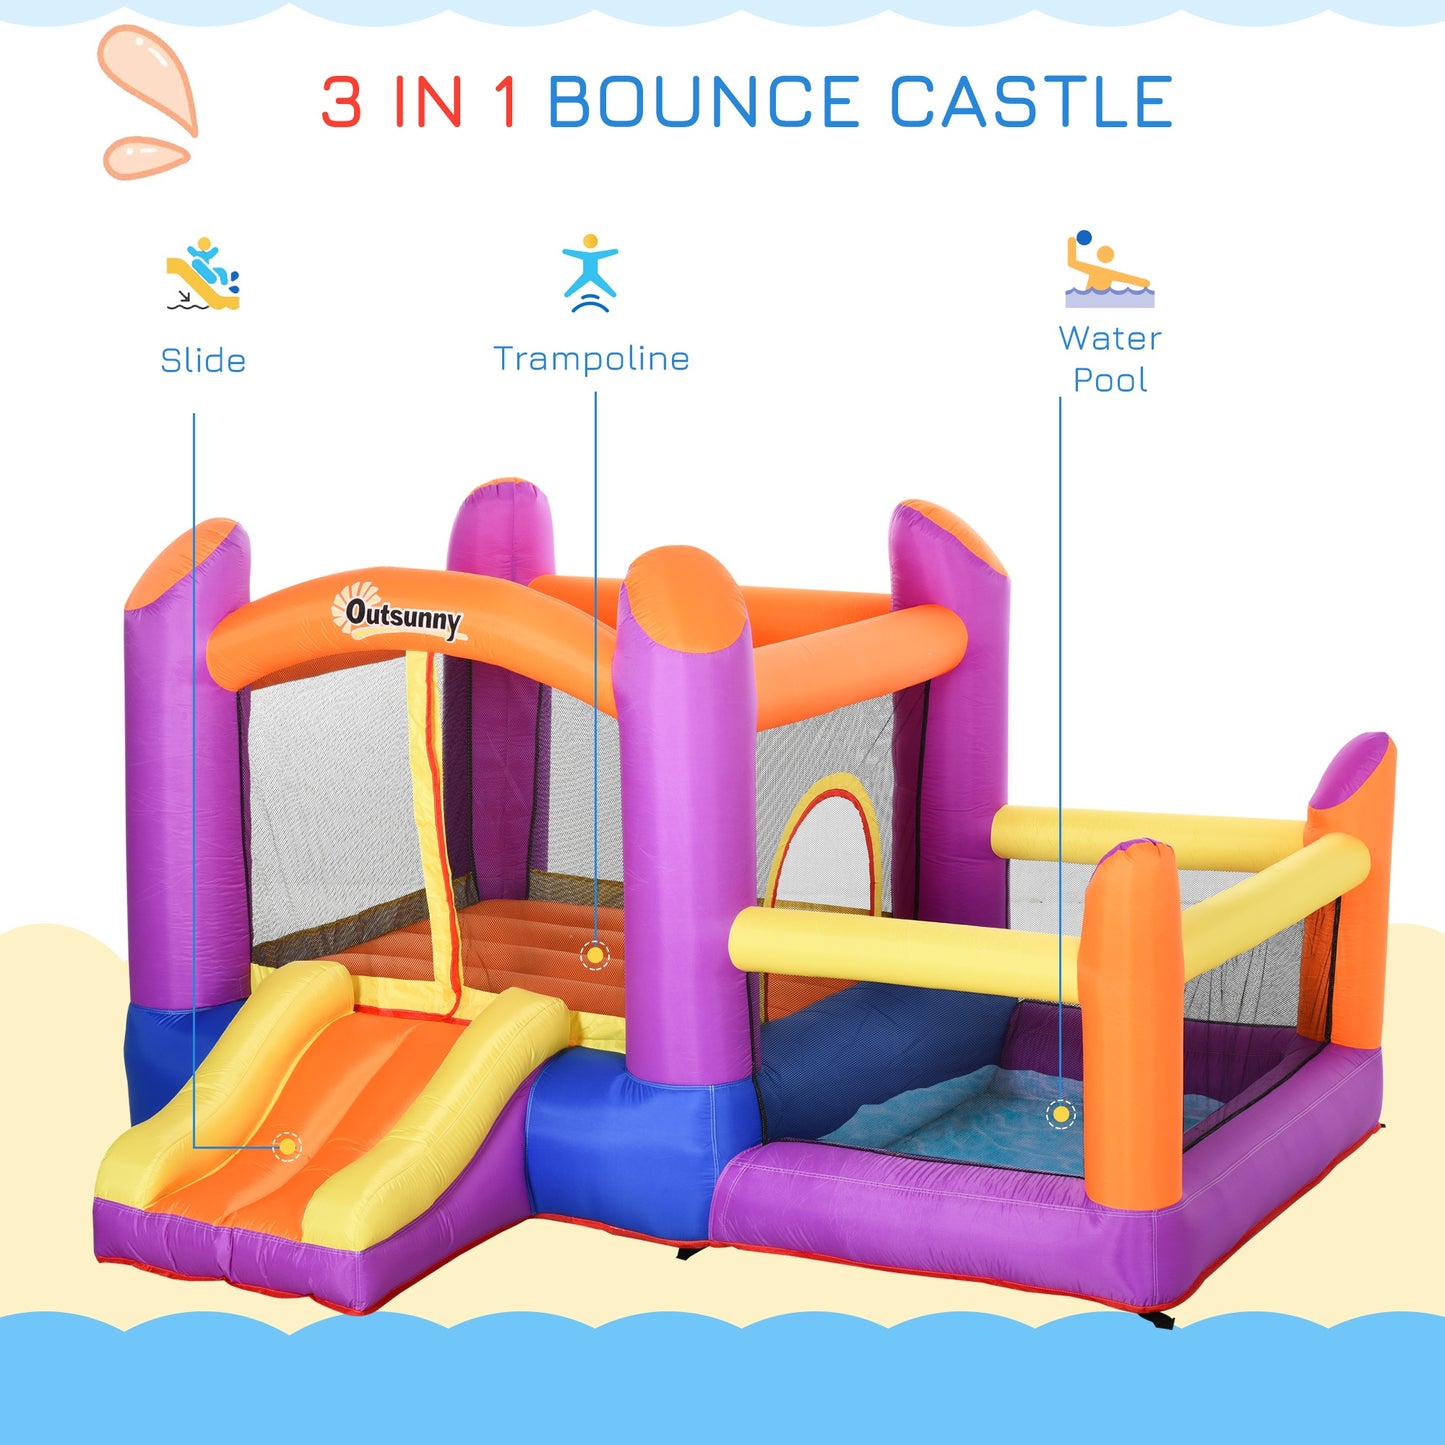 Outsunny Bounce Castle Inflatable Trampoline Slide Pool with inflator 3 x 2.8 x 1.7m